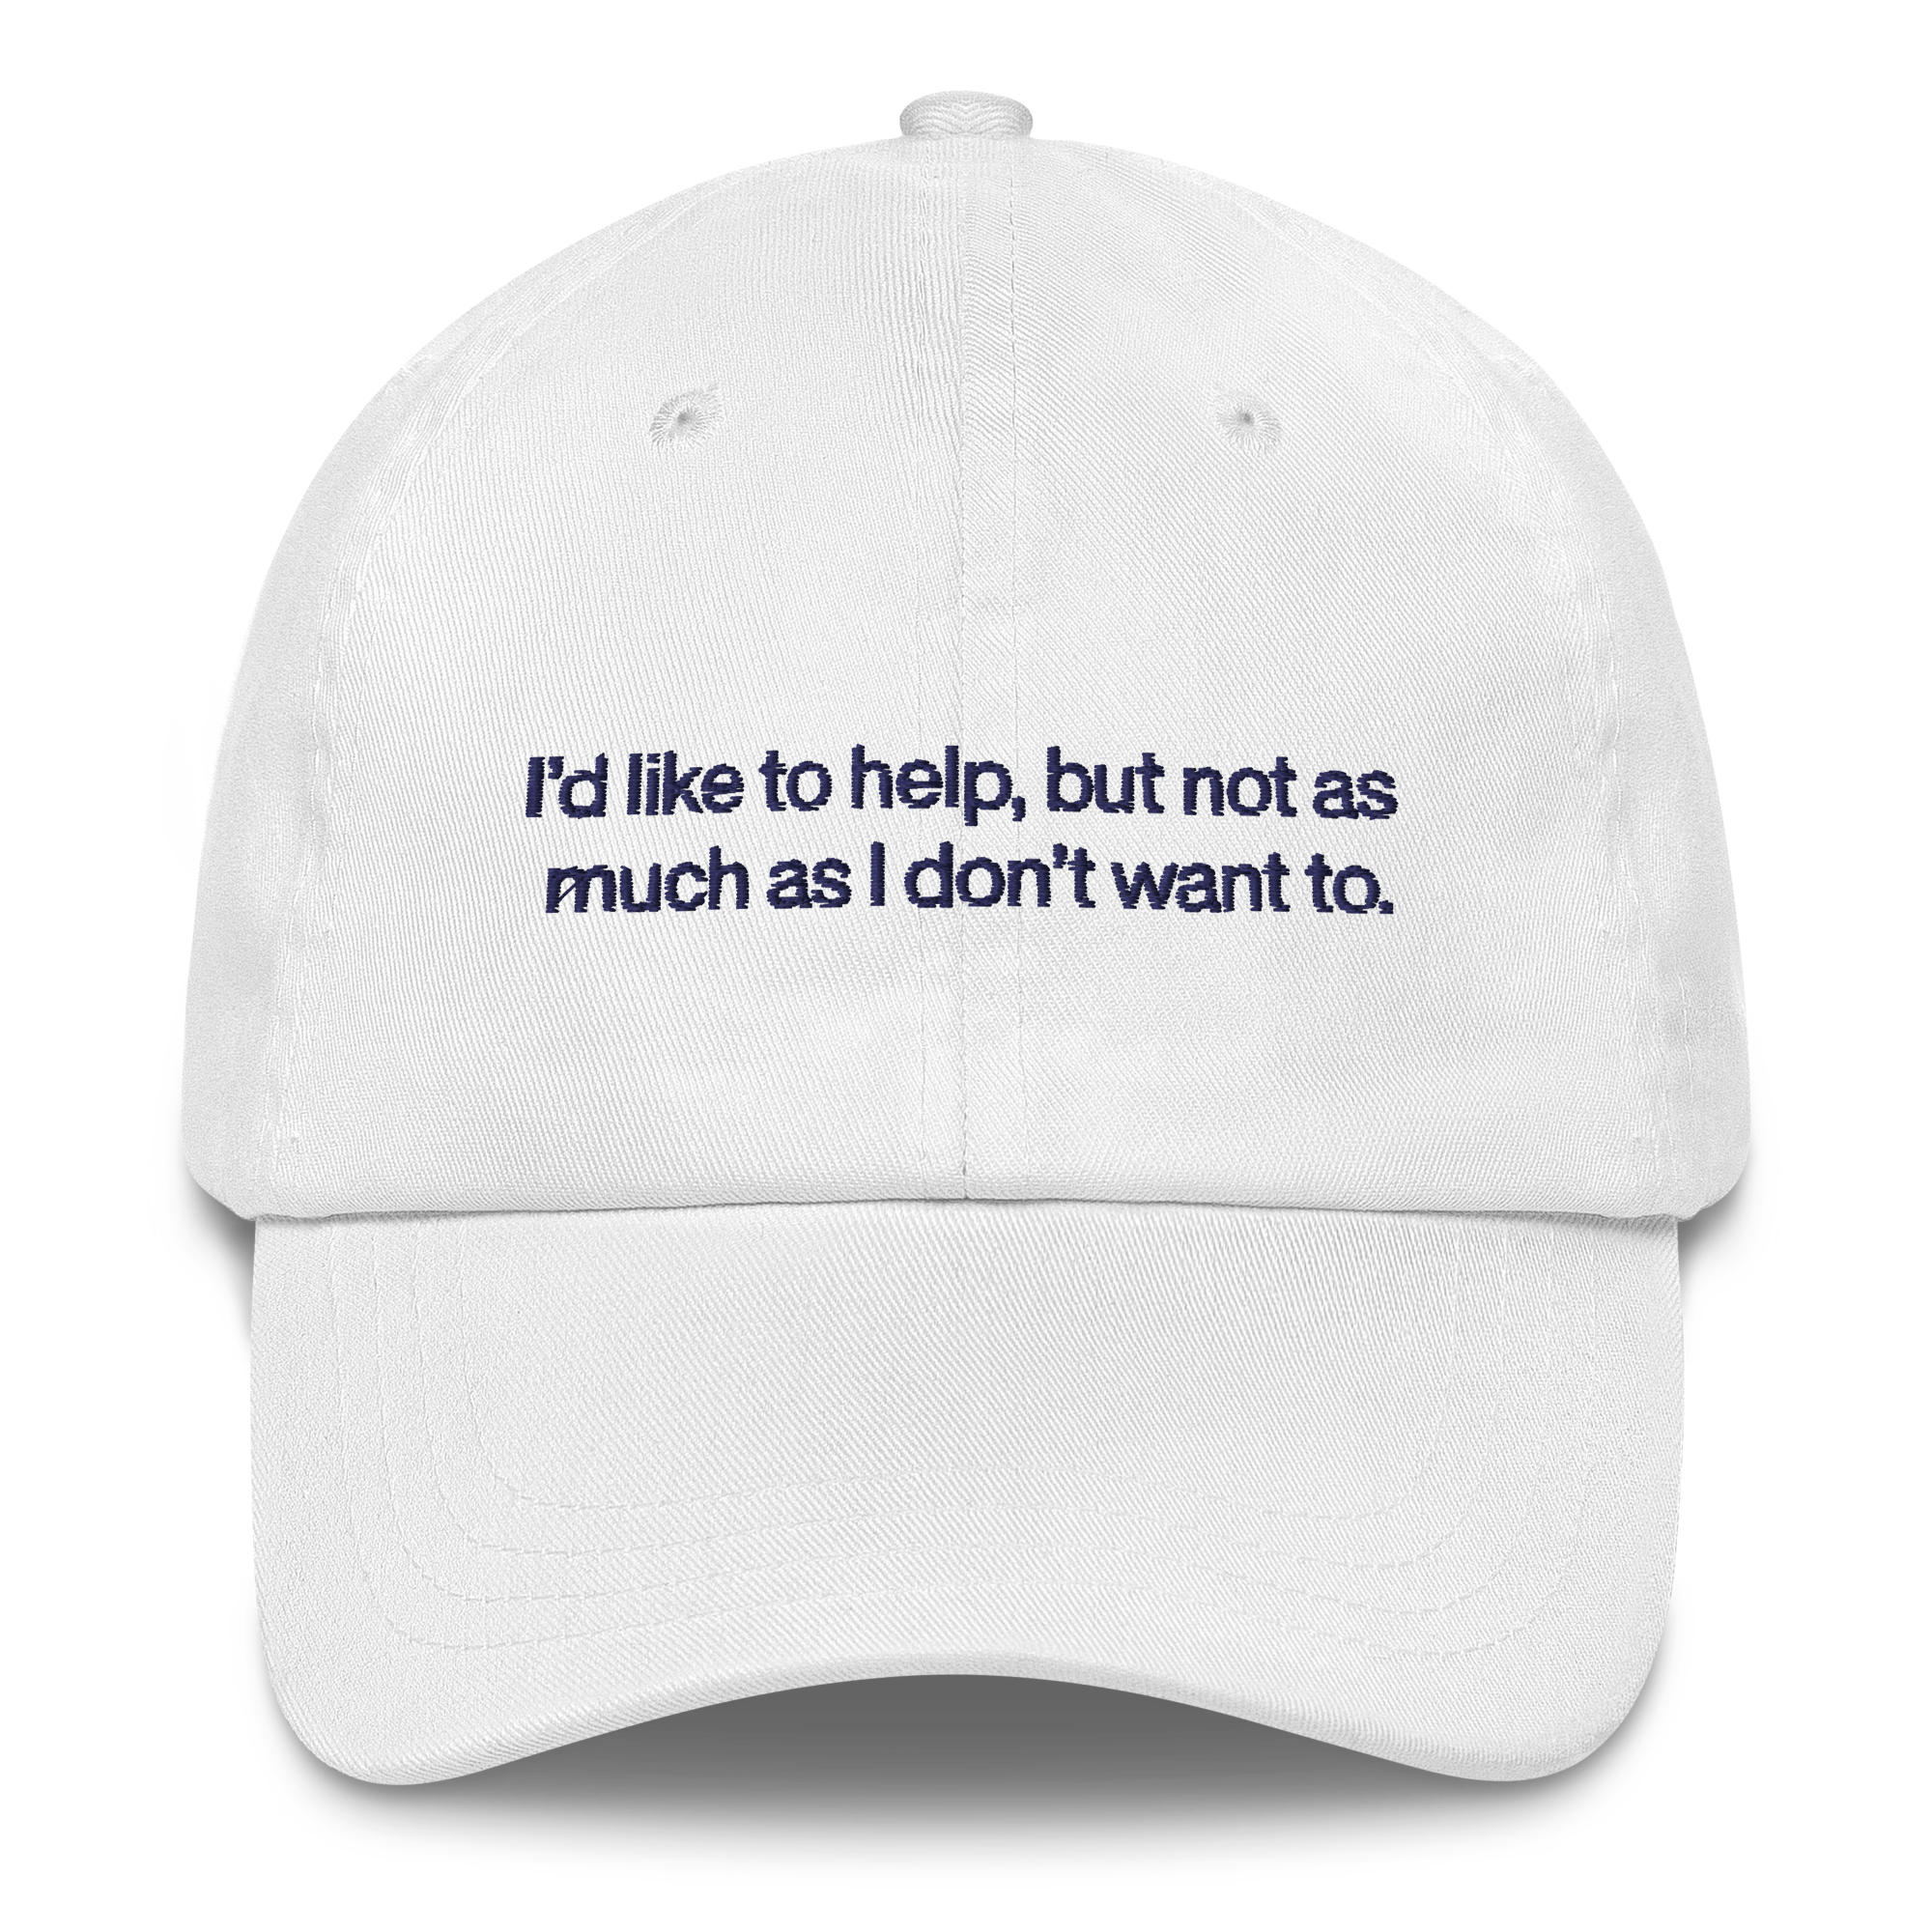 classic-dad-hat-white-front-667b2661b9666.png